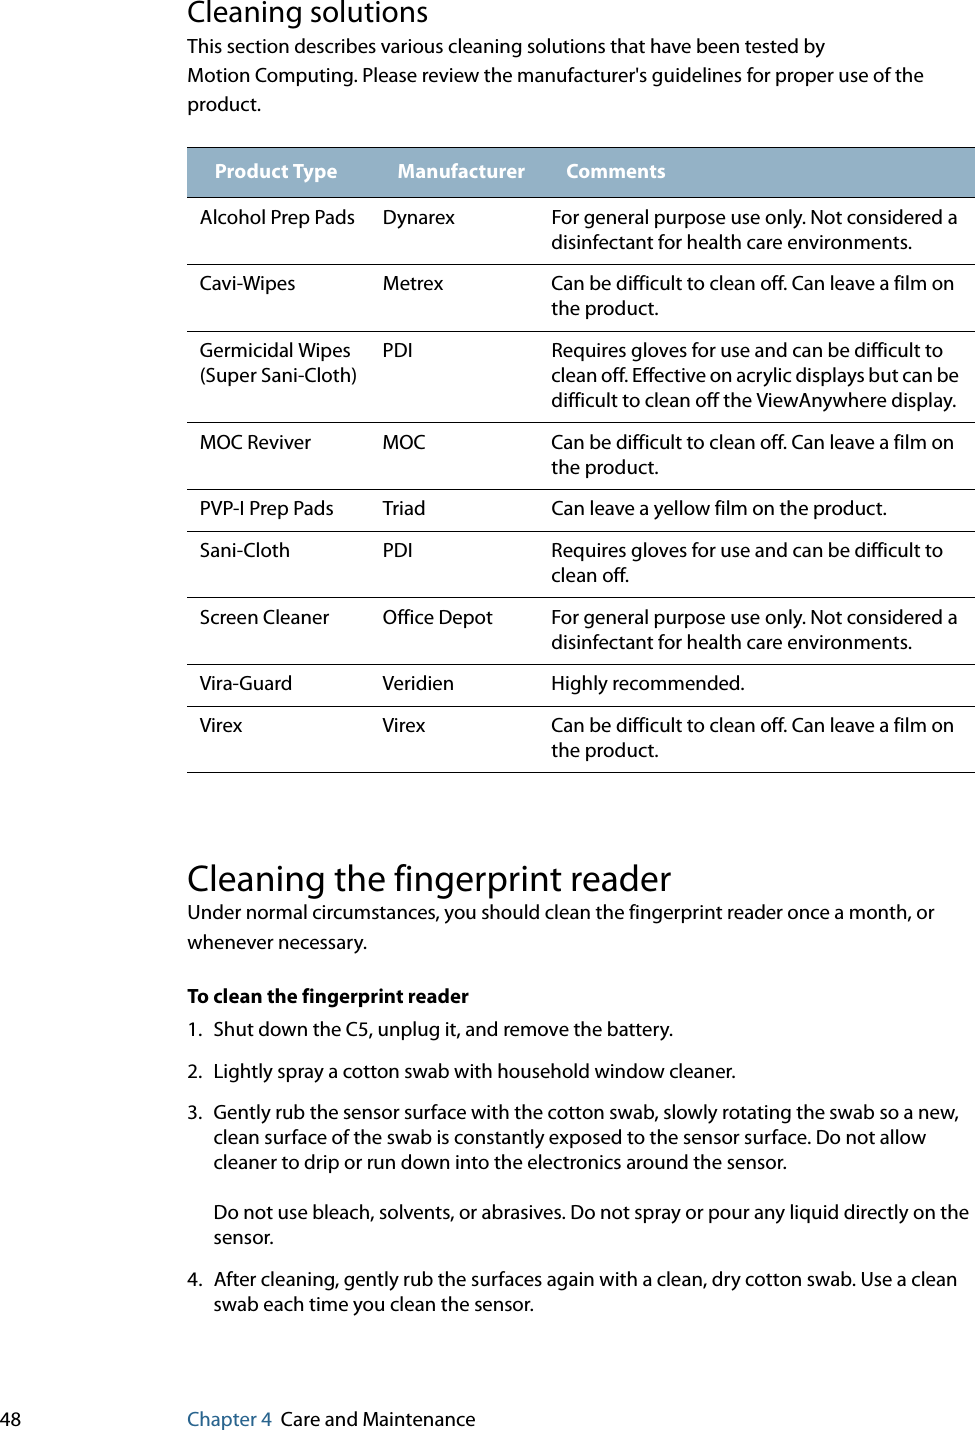 48 Chapter 4 Care and MaintenanceCleaning solutionsThis section describes various cleaning solutions that have been tested by Motion Computing. Please review the manufacturer&apos;s guidelines for proper use of the product.Cleaning the fingerprint readerUnder normal circumstances, you should clean the fingerprint reader once a month, or whenever necessary.To clean the fingerprint reader1. Shut down the C5, unplug it, and remove the battery.2. Lightly spray a cotton swab with household window cleaner.3. Gently rub the sensor surface with the cotton swab, slowly rotating the swab so a new, clean surface of the swab is constantly exposed to the sensor surface. Do not allow cleaner to drip or run down into the electronics around the sensor.Do not use bleach, solvents, or abrasives. Do not spray or pour any liquid directly on the sensor.4. After cleaning, gently rub the surfaces again with a clean, dry cotton swab. Use a clean swab each time you clean the sensor.Product Type Manufacturer CommentsAlcohol Prep Pads Dynarex For general purpose use only. Not considered a disinfectant for health care environments.Cavi-Wipes Metrex Can be difficult to clean off. Can leave a film on the product.Germicidal Wipes (Super Sani-Cloth)PDI Requires gloves for use and can be difficult to clean off. Effective on acrylic displays but can be difficult to clean off the ViewAnywhere display.MOC Reviver MOC Can be difficult to clean off. Can leave a film on the product.PVP-I Prep Pads Triad Can leave a yellow film on the product.Sani-Cloth PDI Requires gloves for use and can be difficult to clean off.Screen Cleaner Office Depot For general purpose use only. Not considered a disinfectant for health care environments.Vira-Guard Veridien Highly recommended.Virex Virex Can be difficult to clean off. Can leave a film on the product.